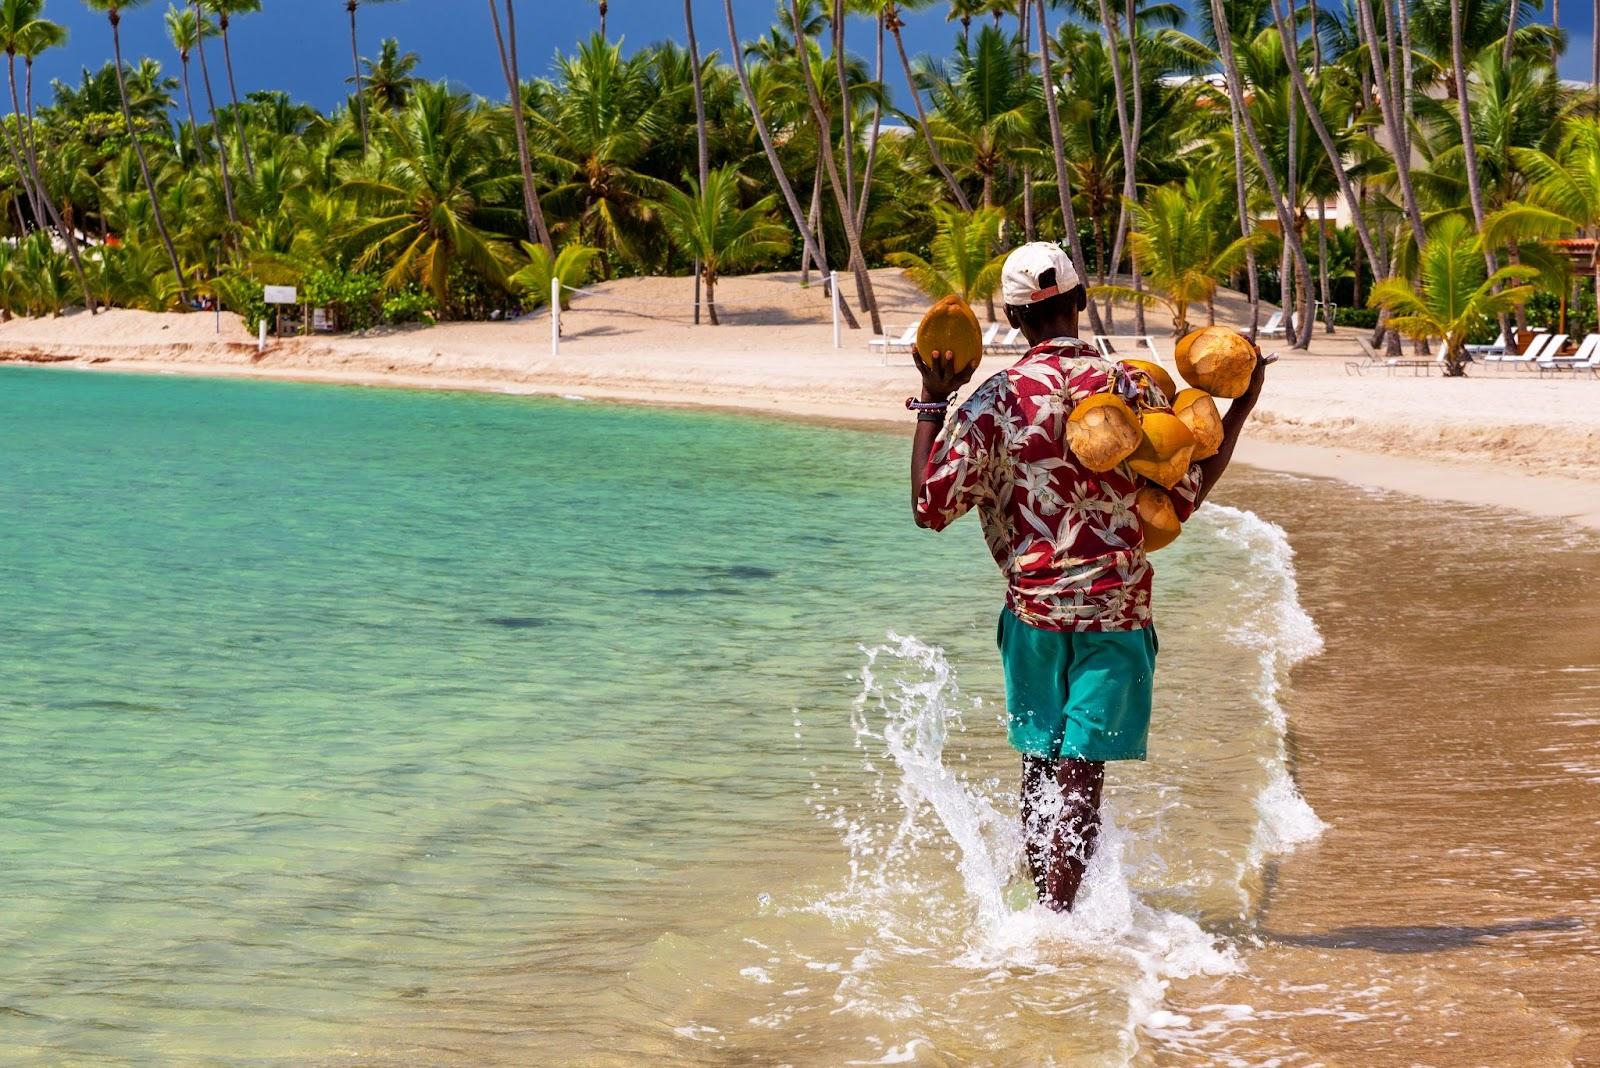 Coconut seller walking by the sea in the famous Juan Dolio Beach of Dominican Republic